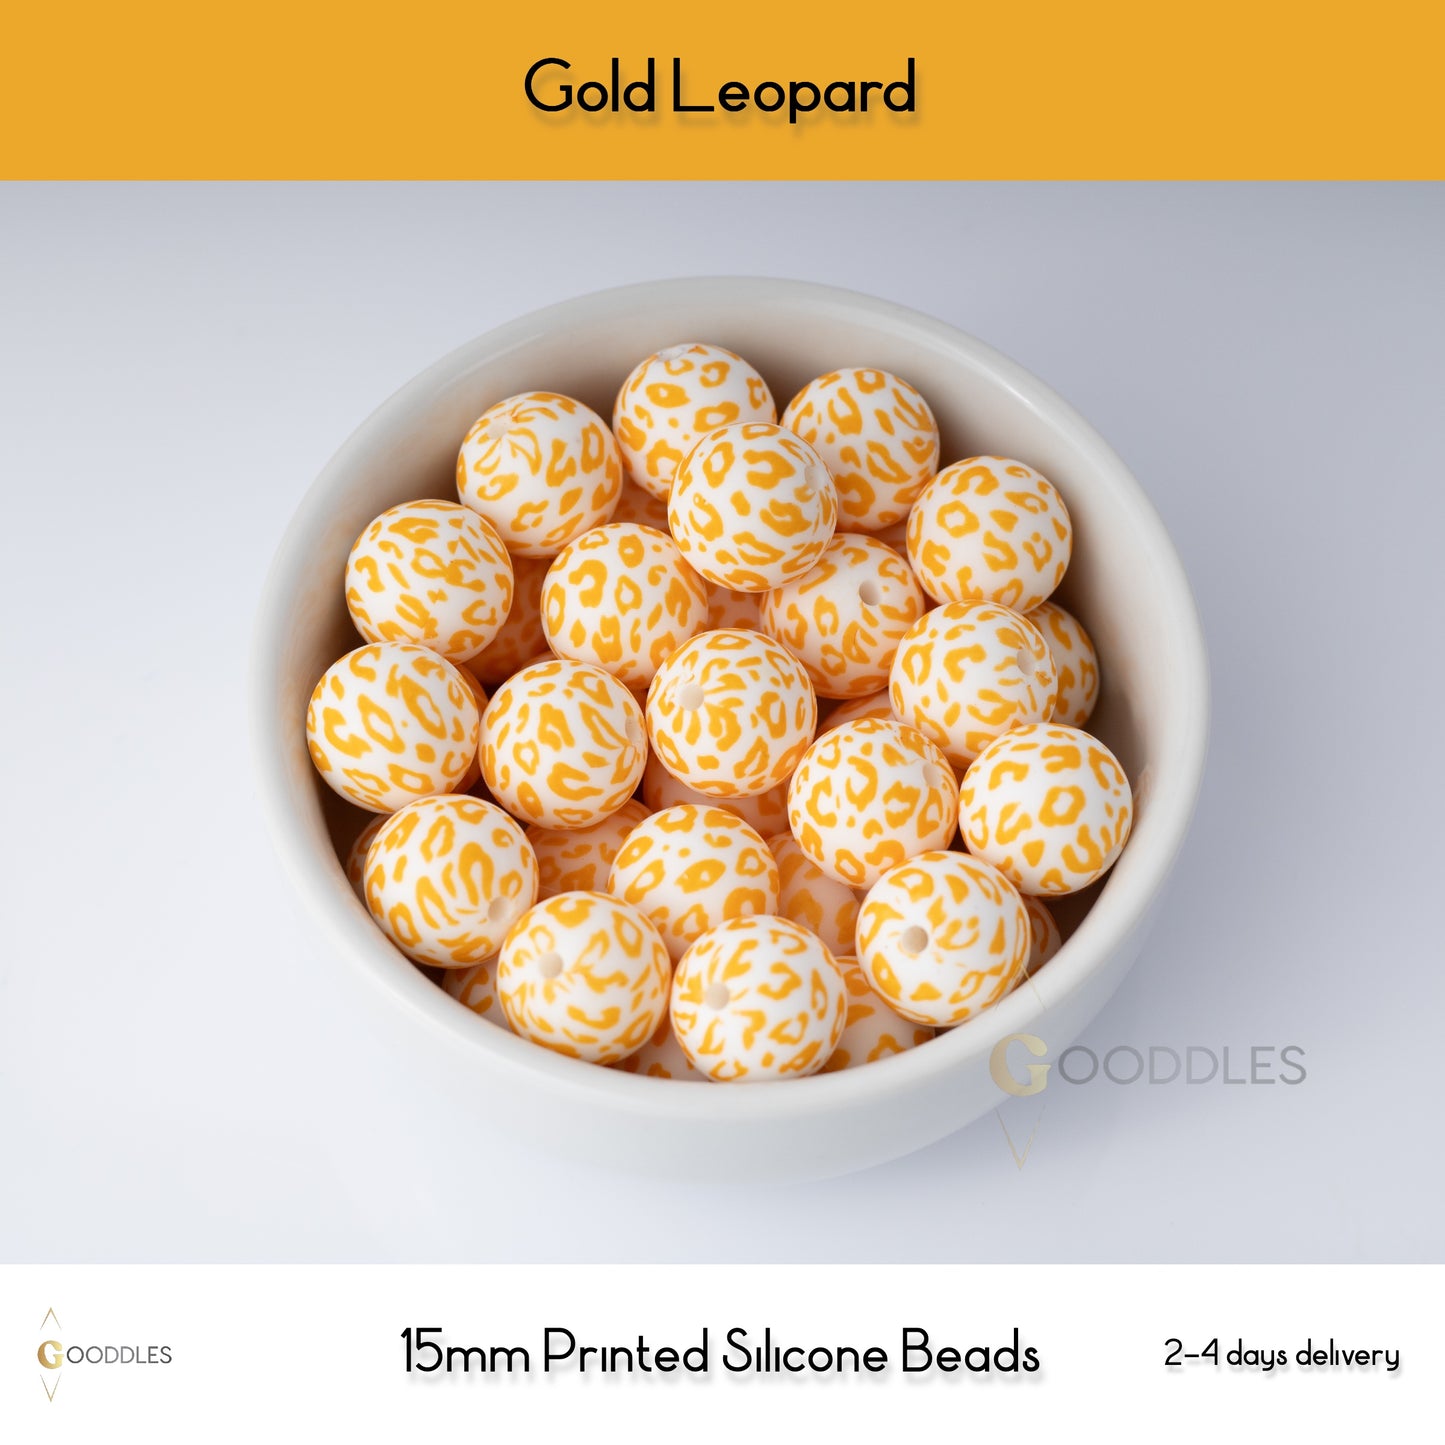 5pcs, Gold Leopard Silicone Beads Printed Round Silicone Beads